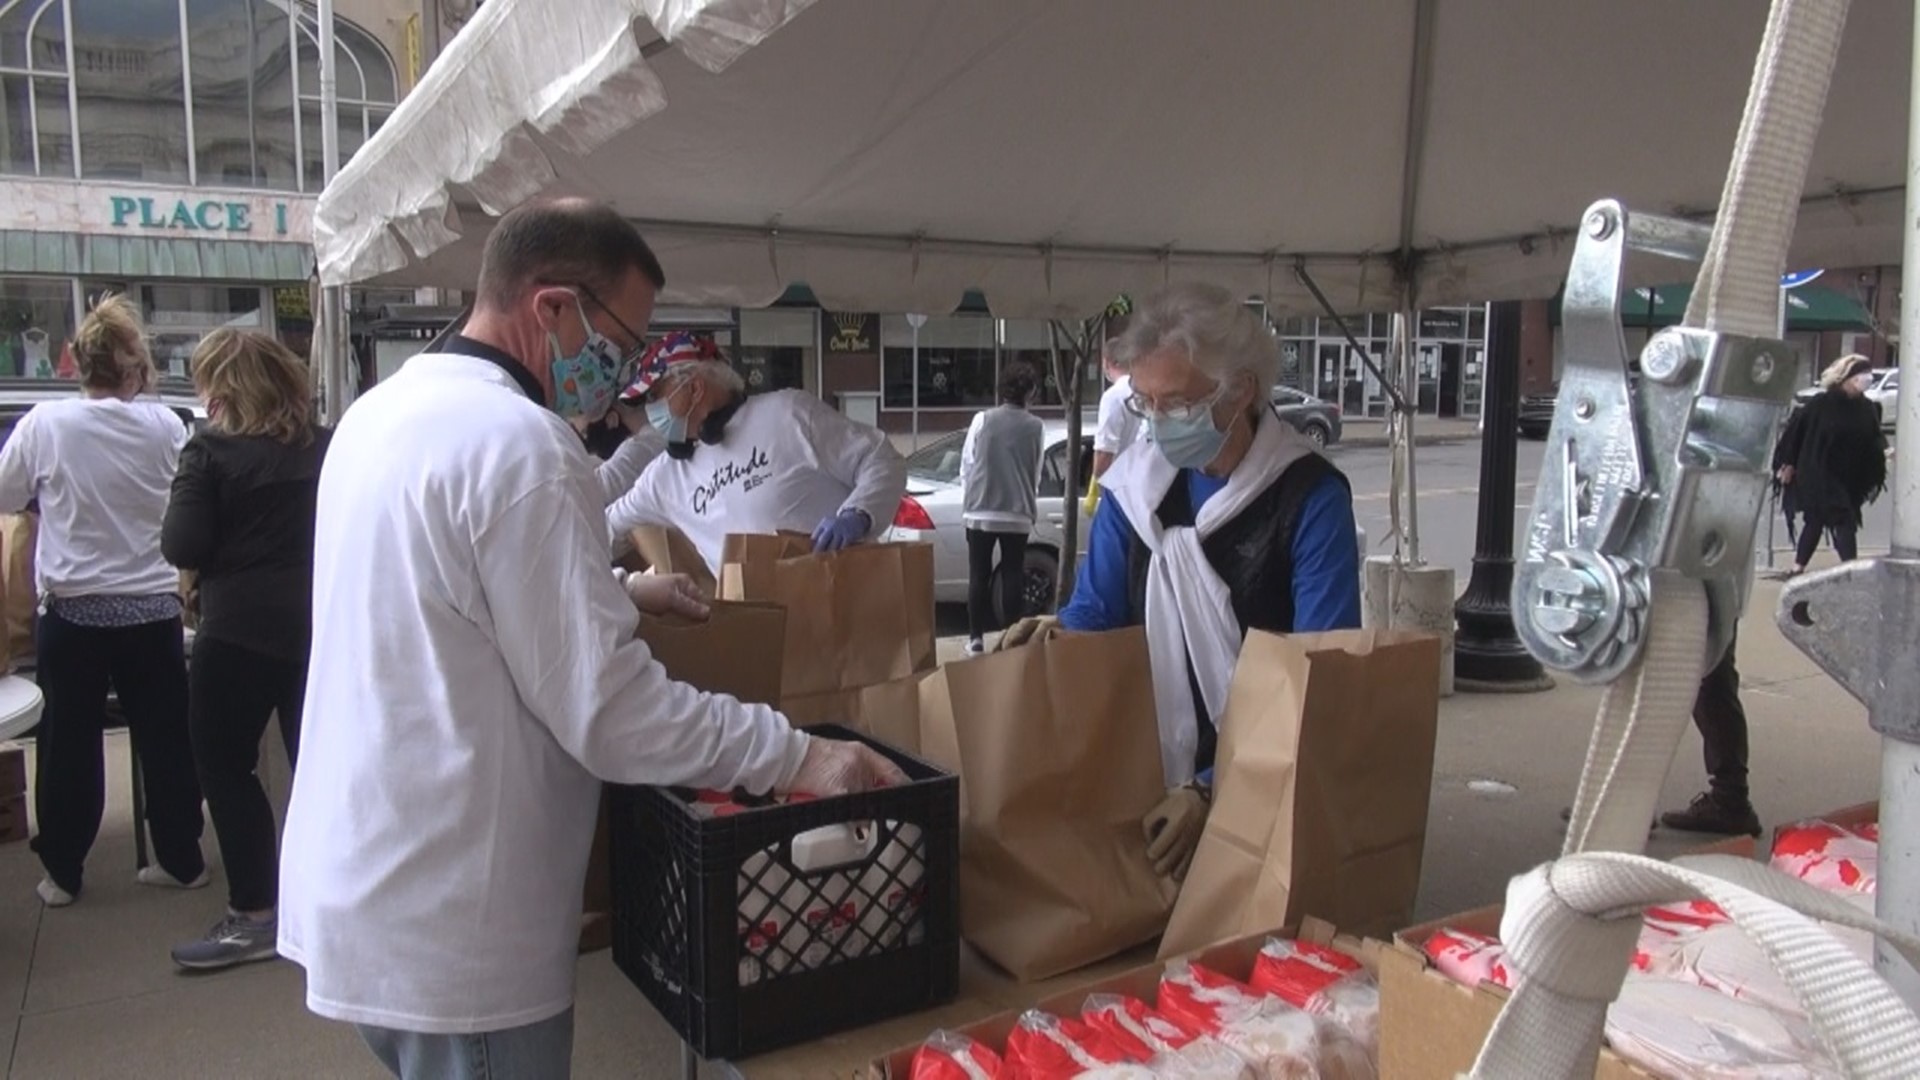 Volunteers distributed groceries to those impacted by the economic downturn.